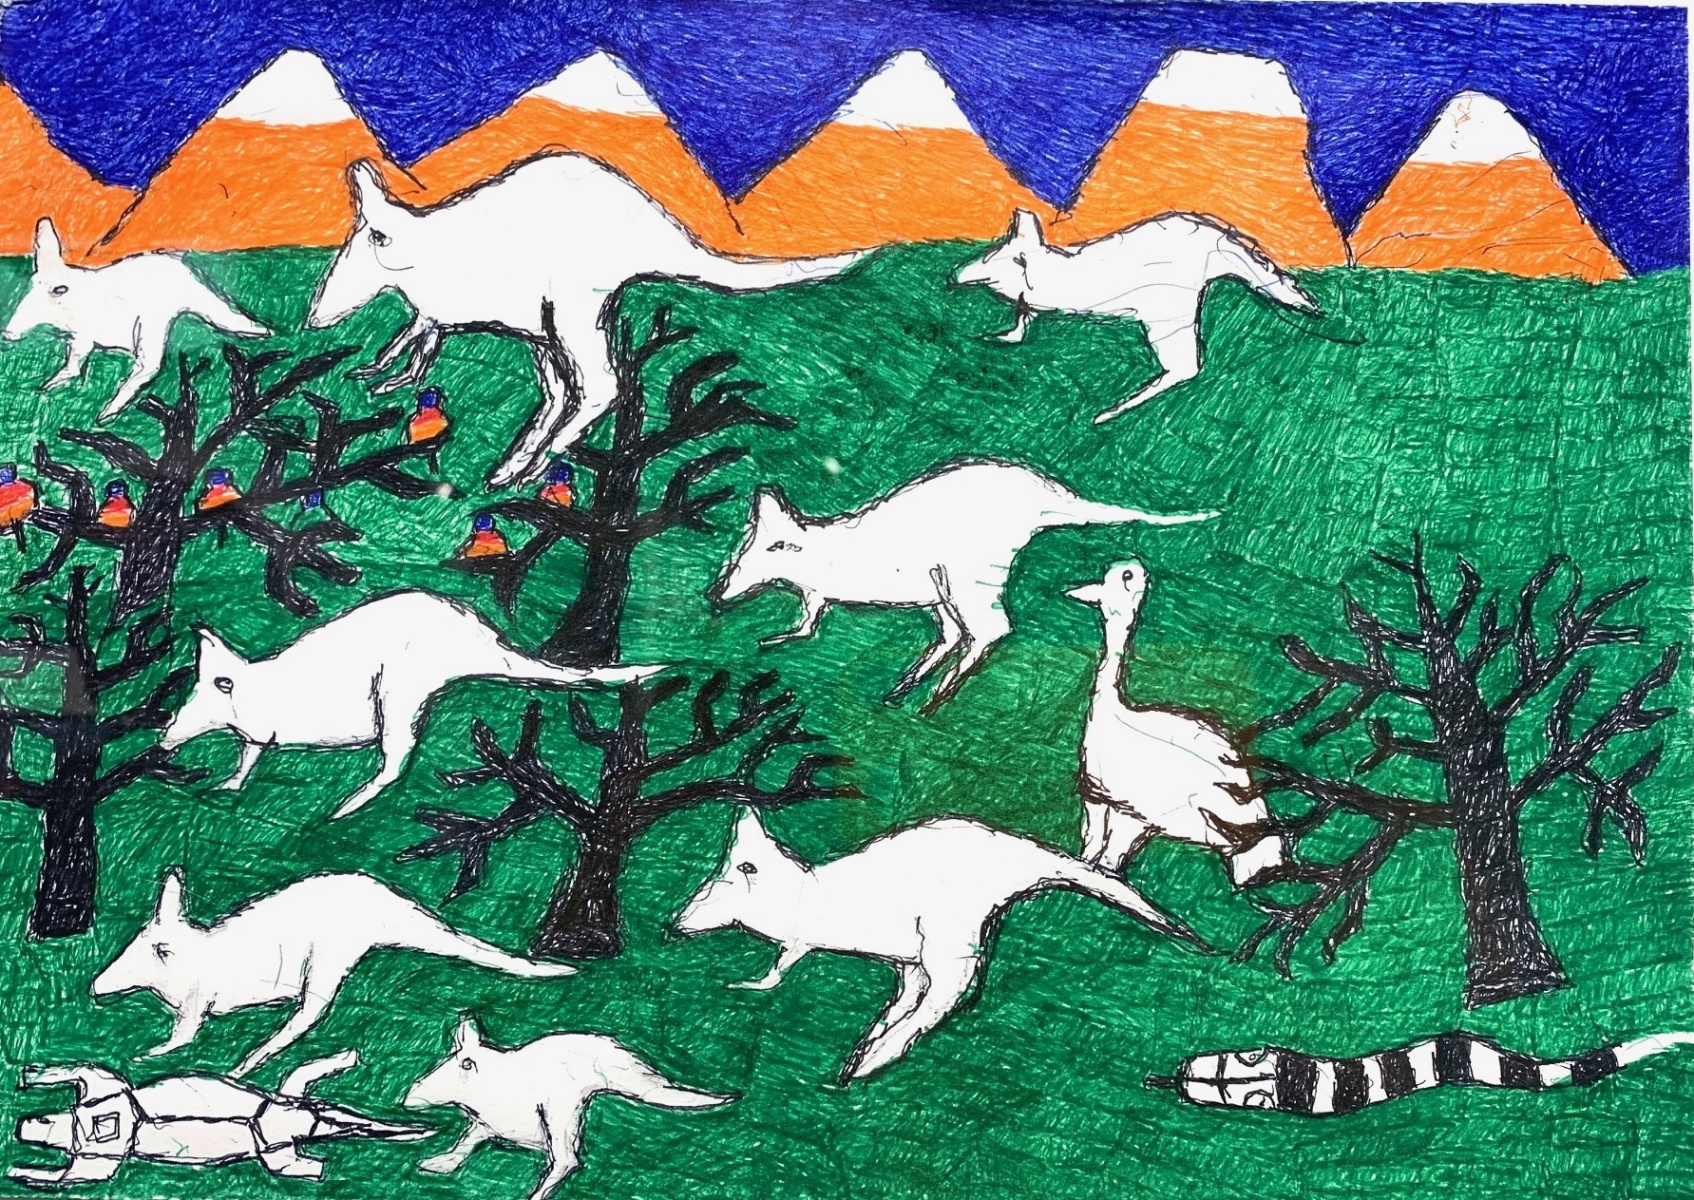 Kangaroos, trees and a snake drawn in colourful markers on white paper